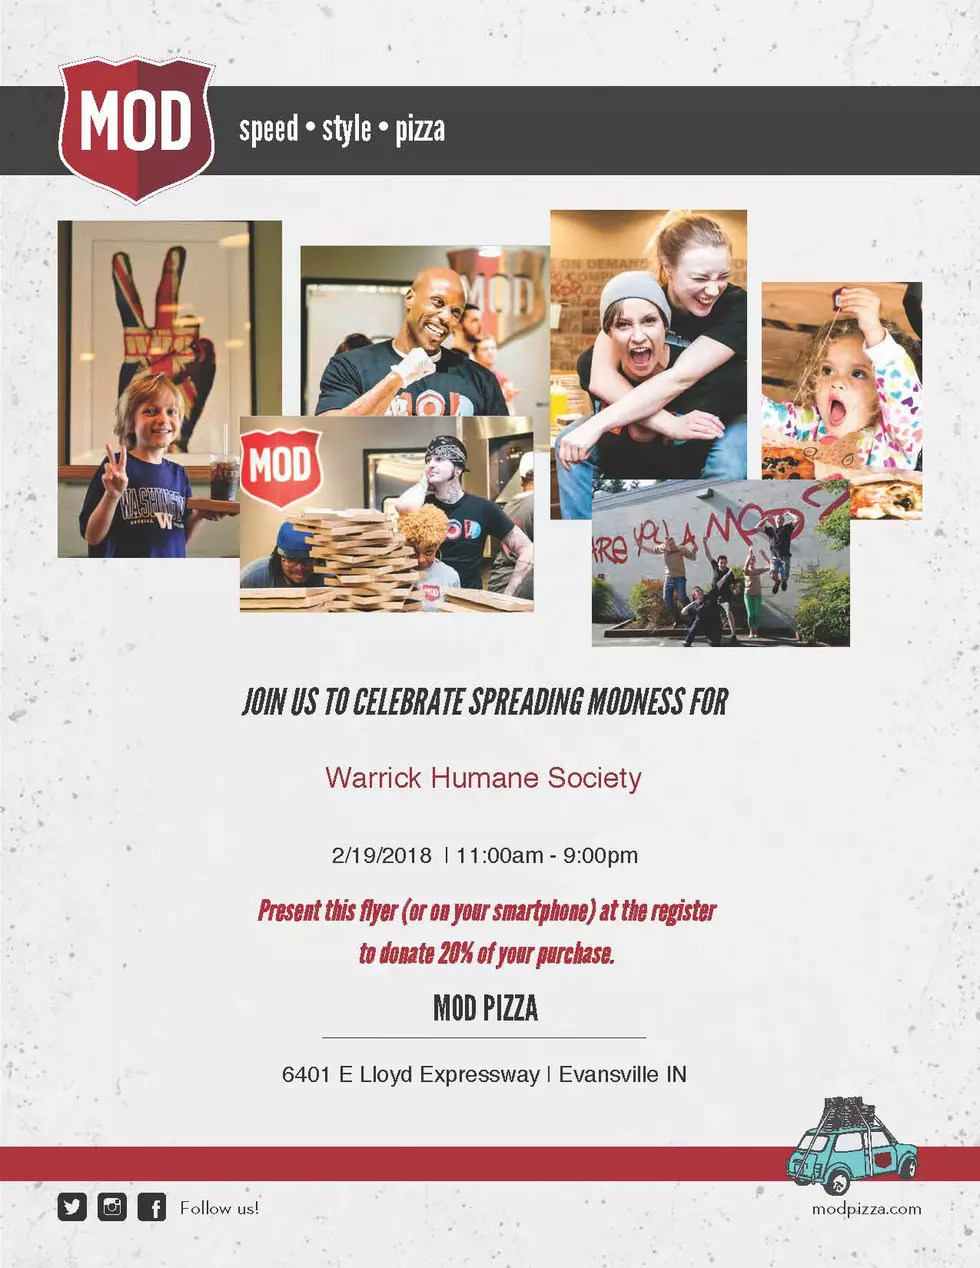 Eat MOD Pizza Monday and Help The Warrick Humane Society!